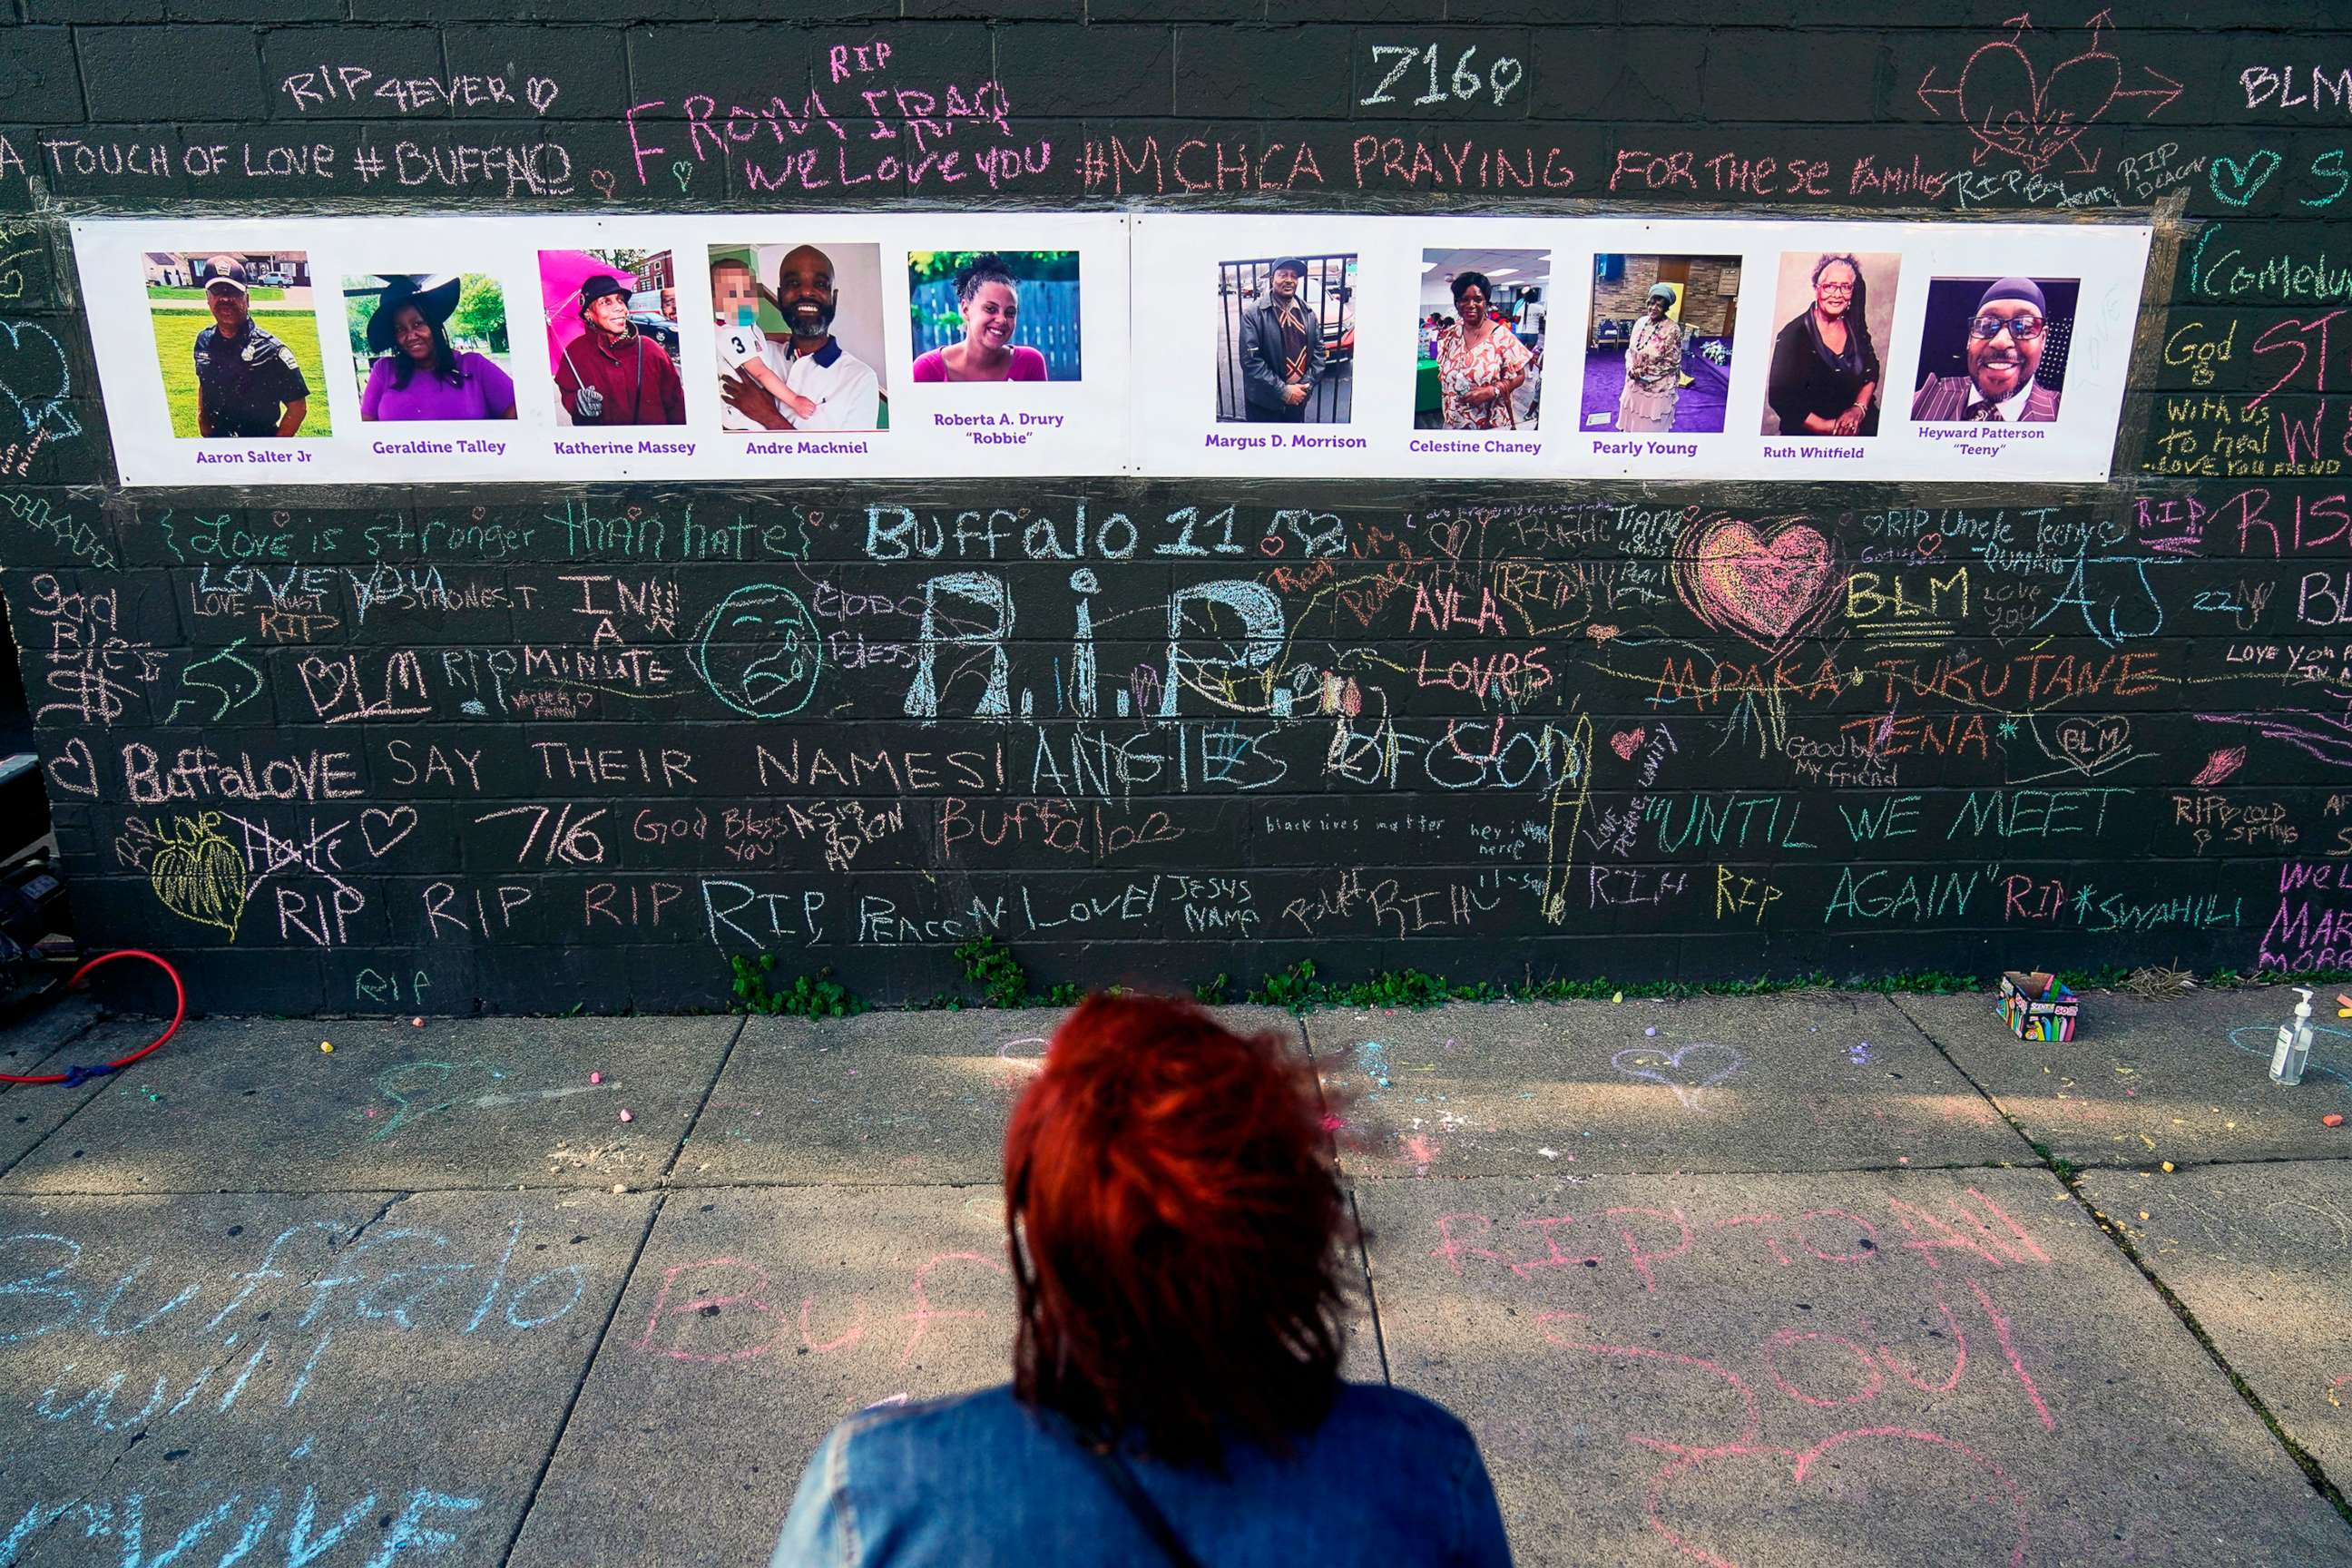 PHOTO: A person visits a makeshift memorial near the scene of the shooting at a supermarket, in Buffalo, N.Y., May 19, 2022.